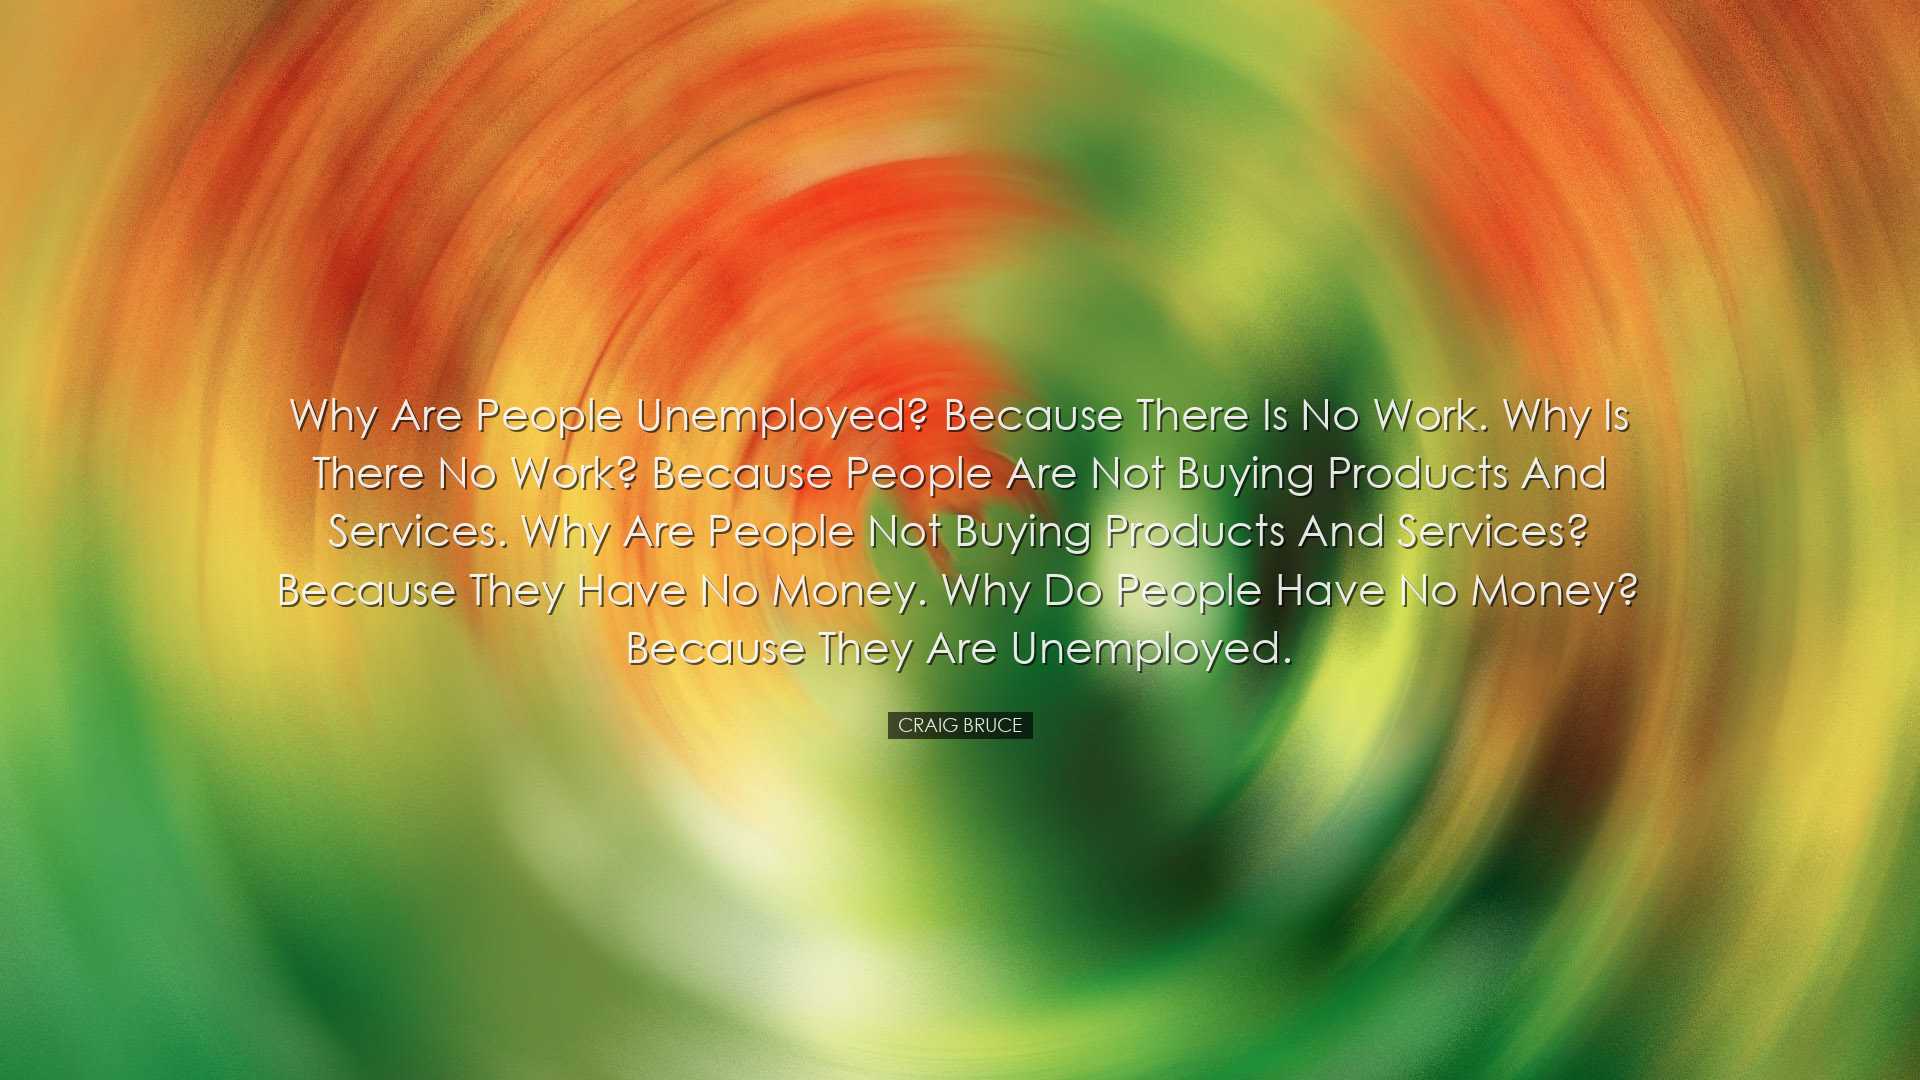 Why are people unemployed? Because there is no work. Why is there